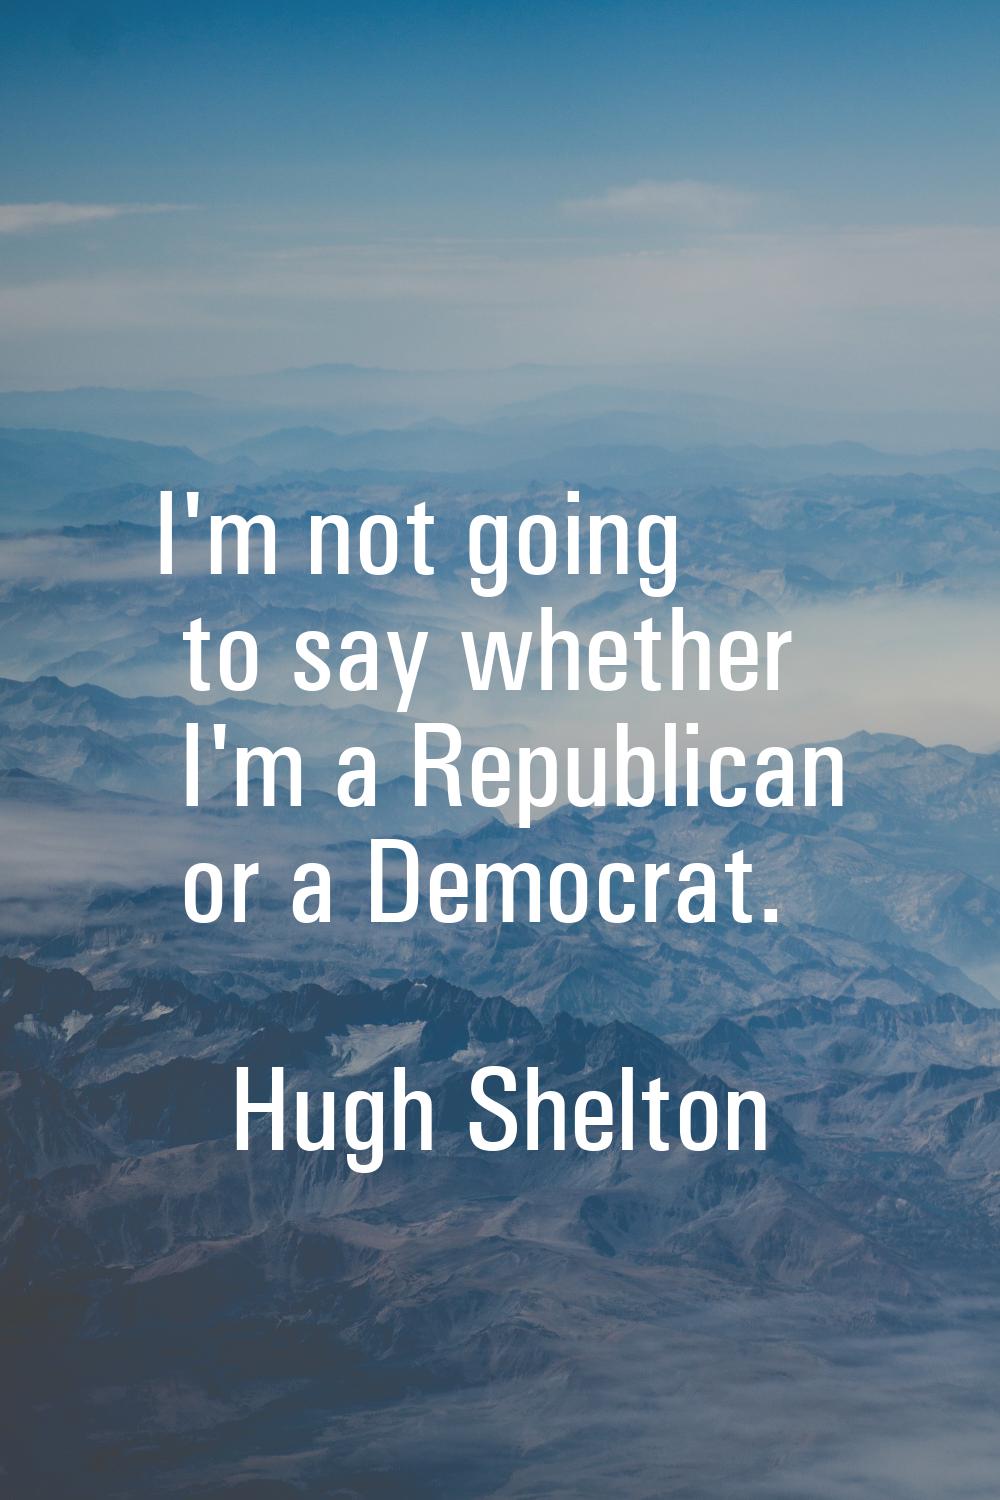 I'm not going to say whether I'm a Republican or a Democrat.